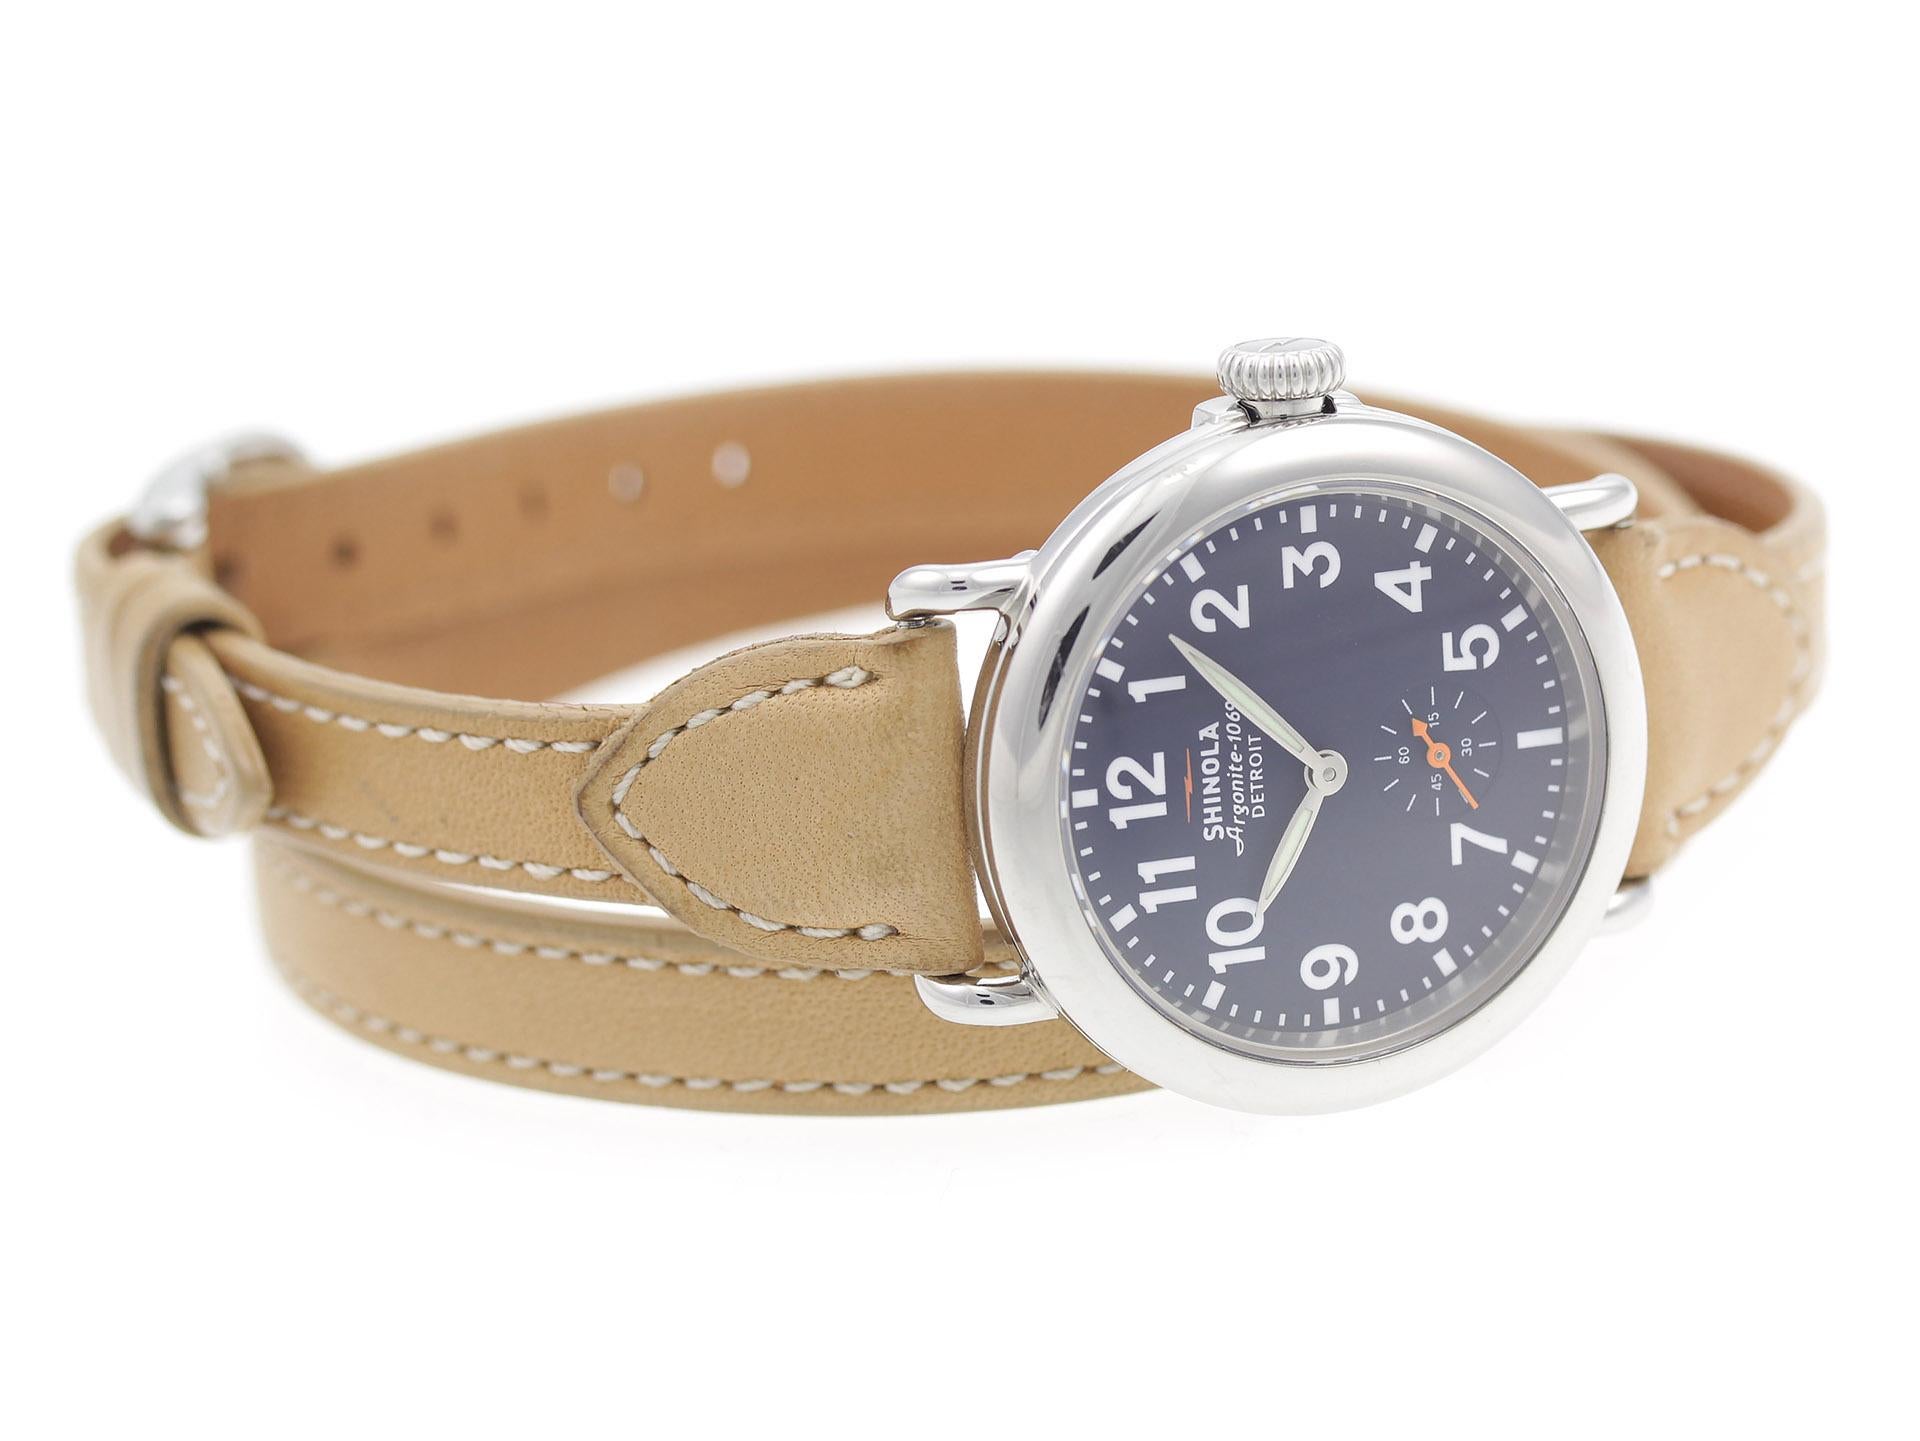 Stainless steel case, on brown triple wrap leather strap Shinola The Runwell 36mm 10000260 ladies’ watch with midnight blue dial.

Watch	
Brand:	Shinola
Series:	The Runwell 36mm
Model #:	10000260
Gender:	Ladies’
Condition:	Good Pre-owned, Scratches